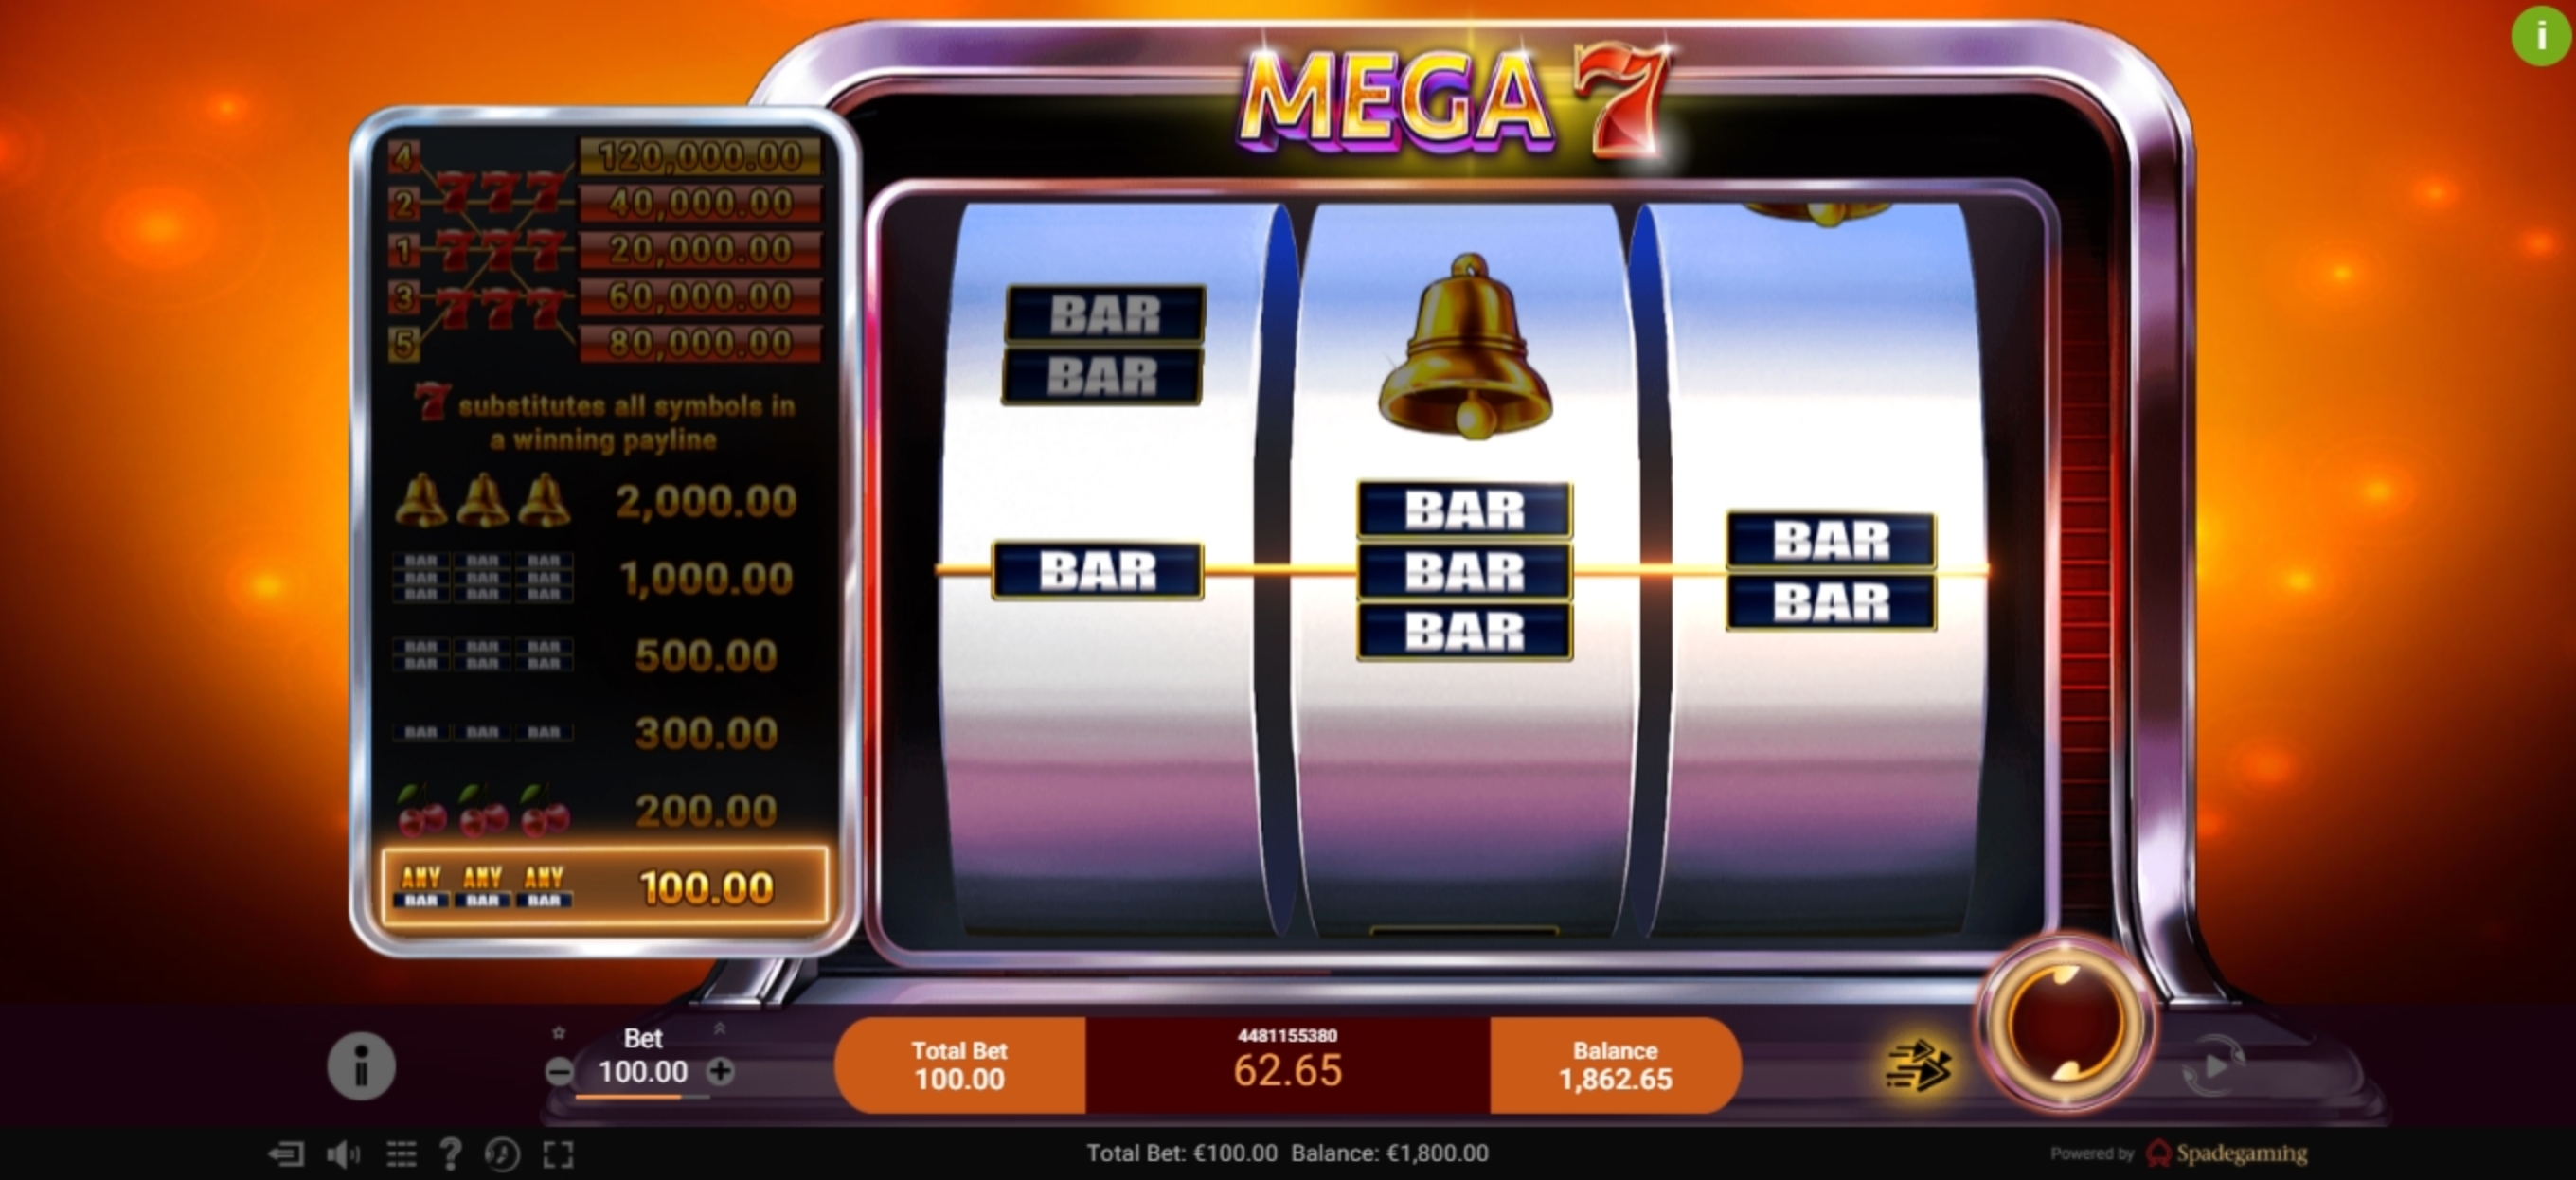 Win Money in Mega 7 Free Slot Game by Spade Gaming